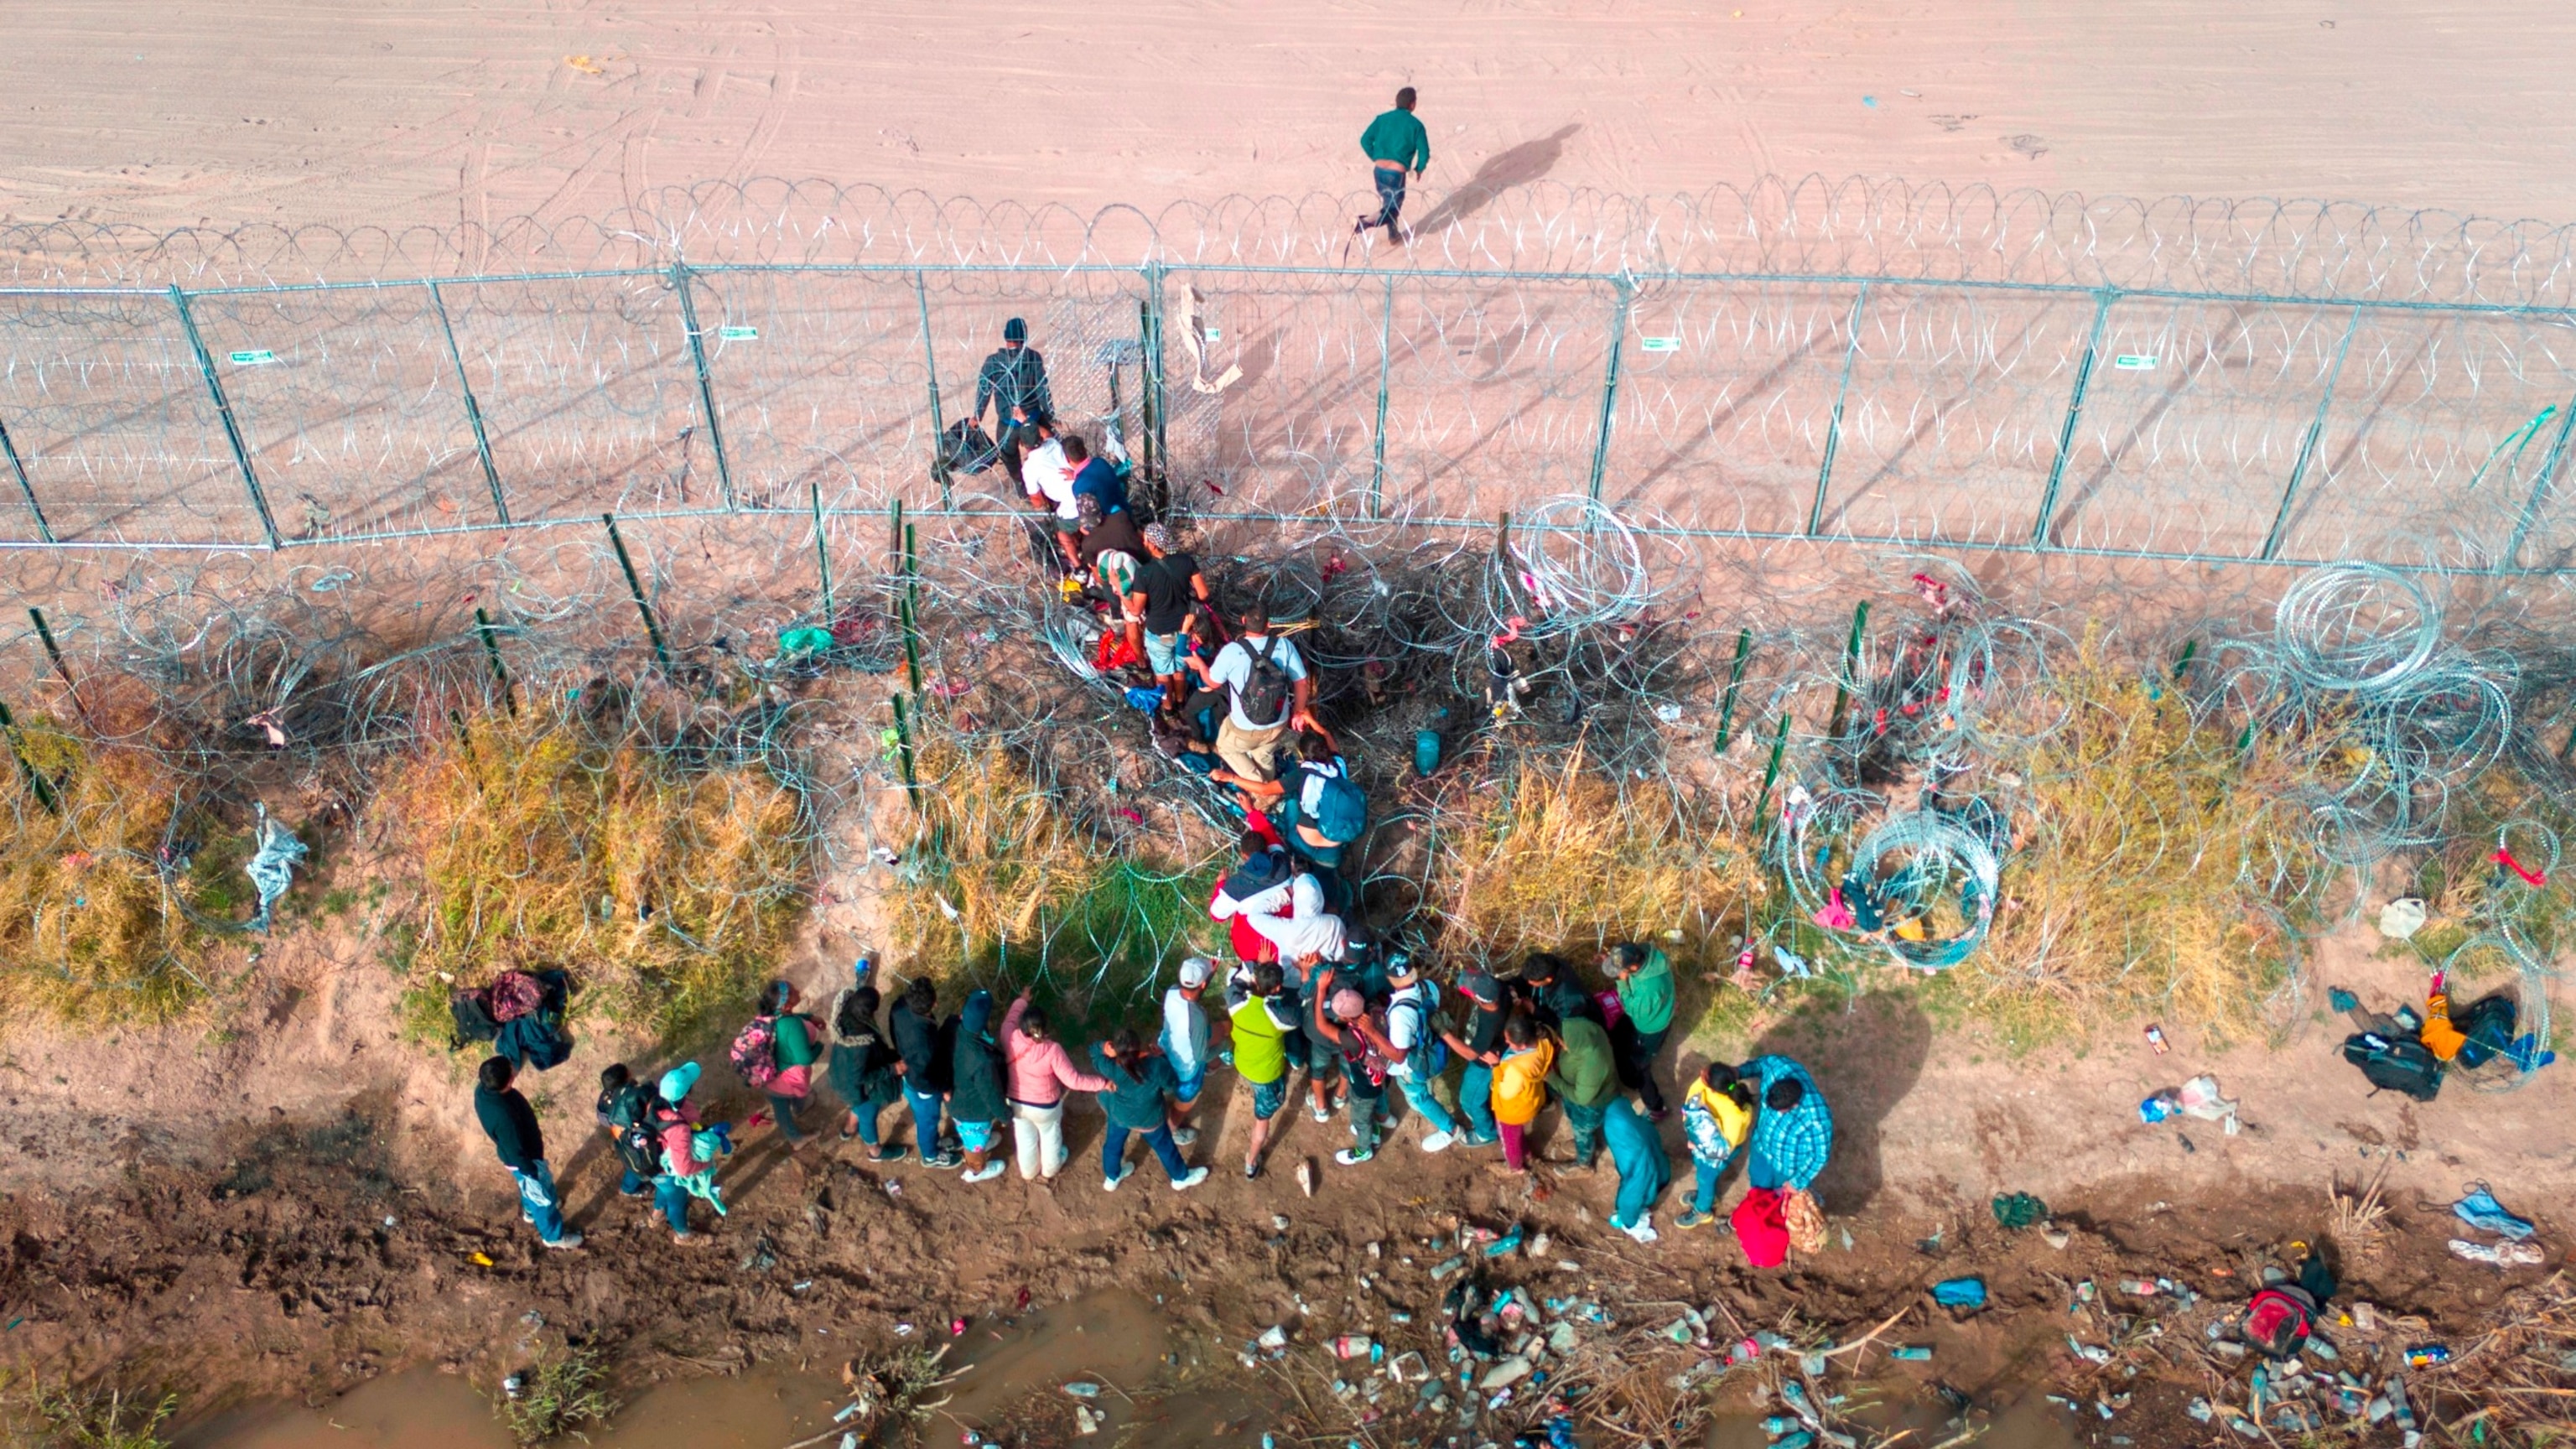 PHOTO: Immigrants pass through razor wire while crossing the U.S.-Mexico border on March 13, 2024, in El Paso, Texas. The wire was placed by the troops as part of Texas Gov. Greg Abbott's "Operation Lone Star" to deter migrants from crossing into Texas.